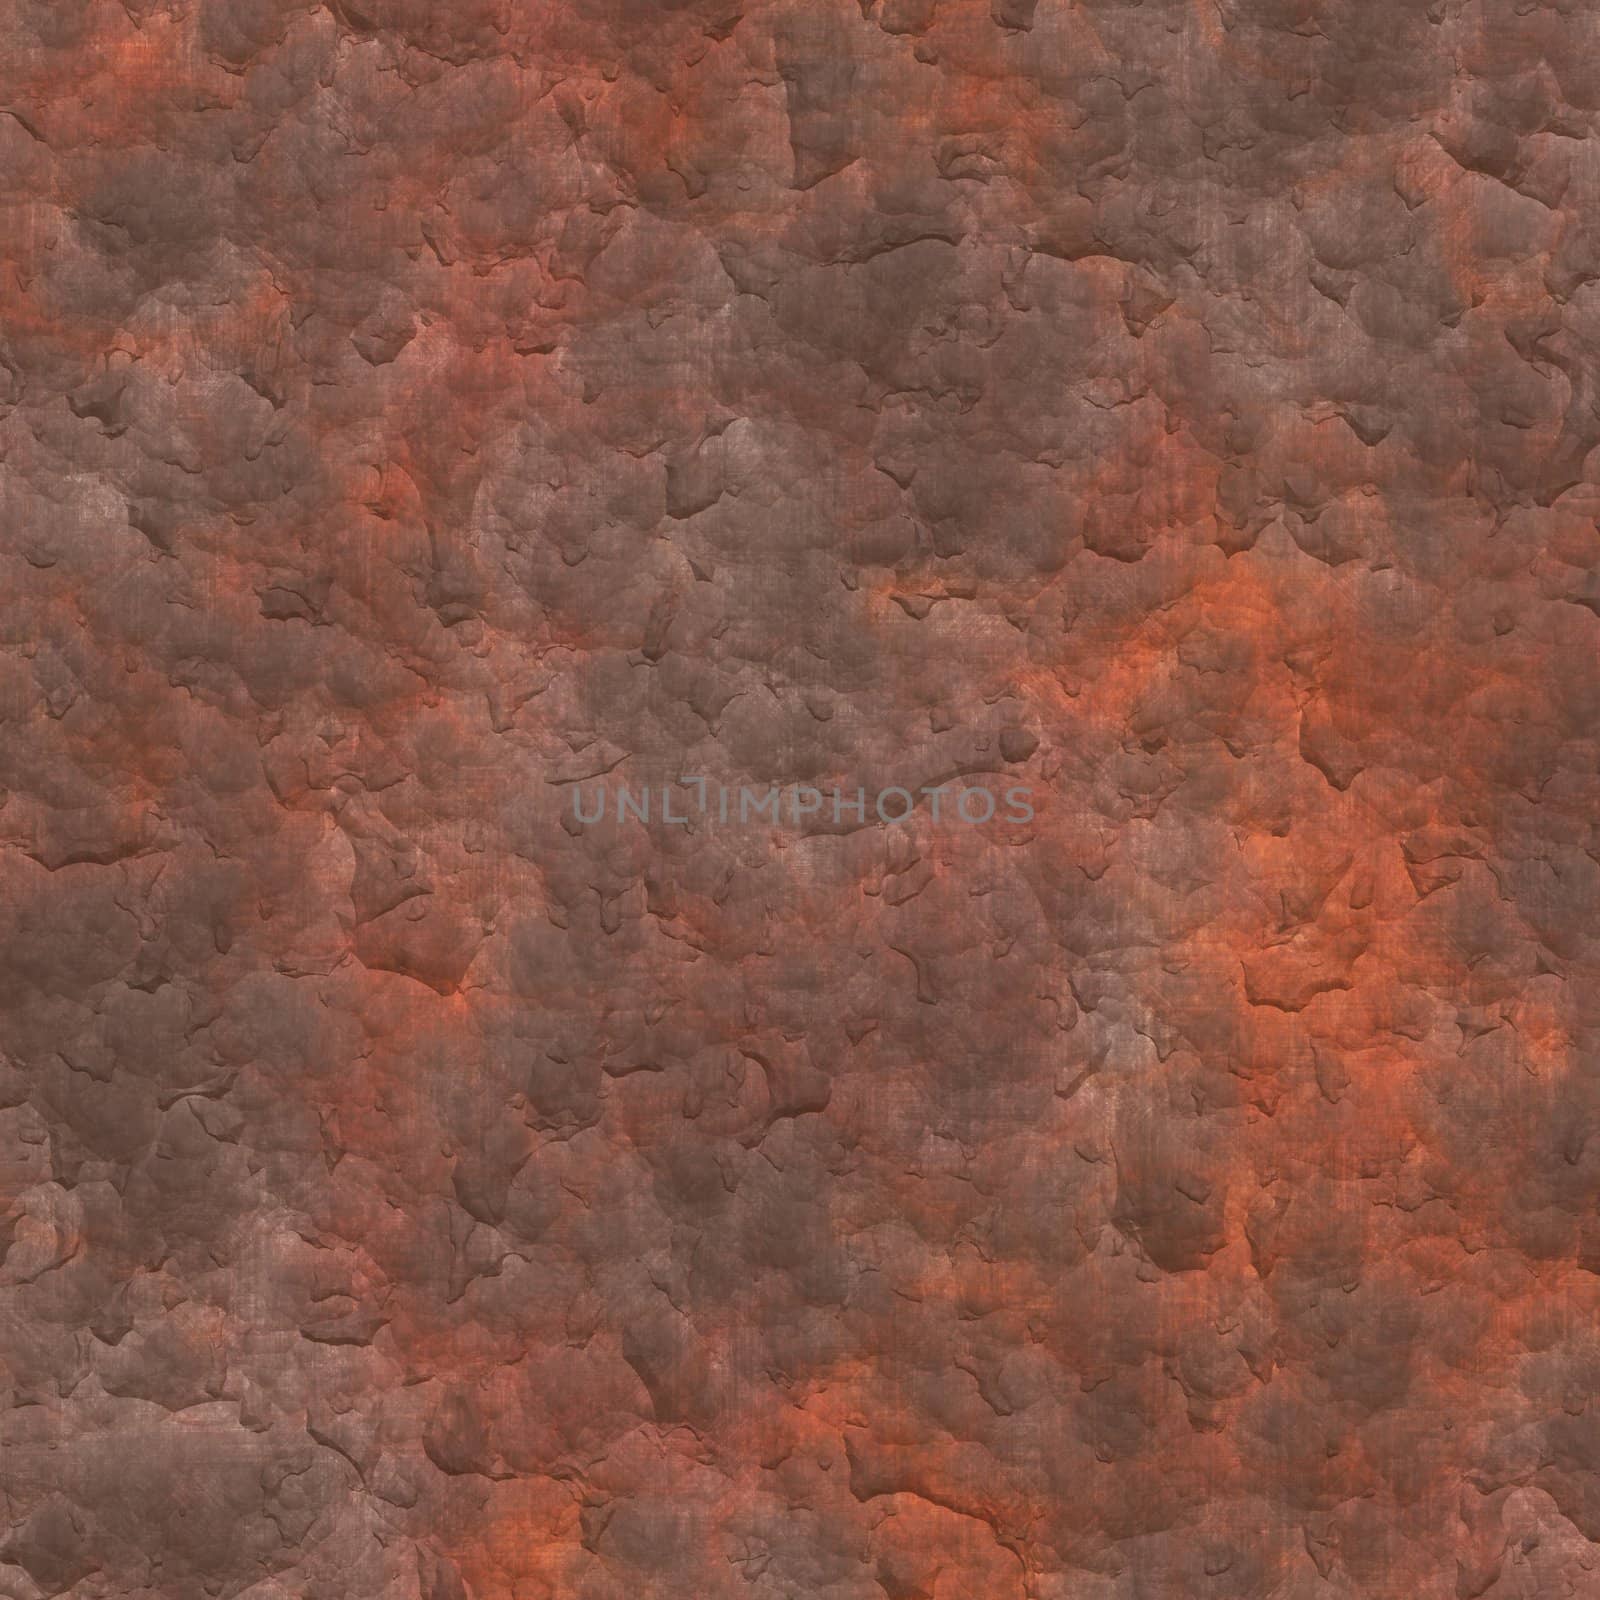 Rusty Metal Plate Texture Grunge Background in Various Colors